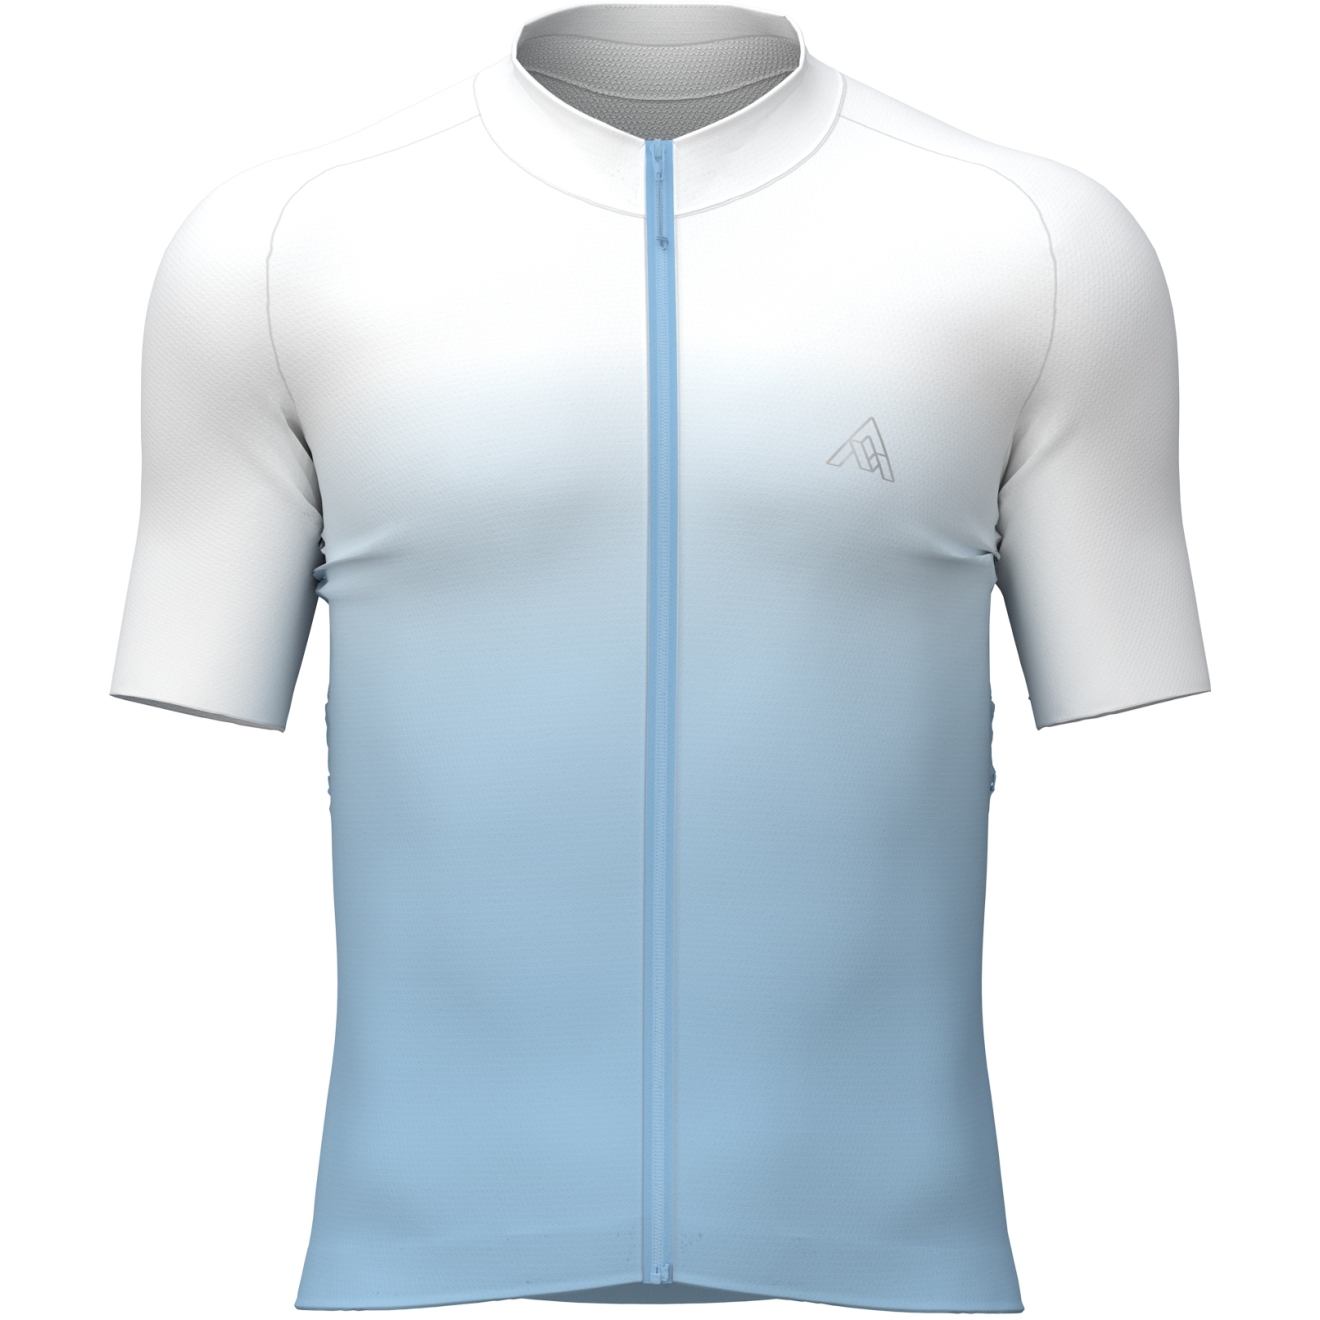 Picture of 7mesh Skyline Short Sleeve Jersey - Early Dawn